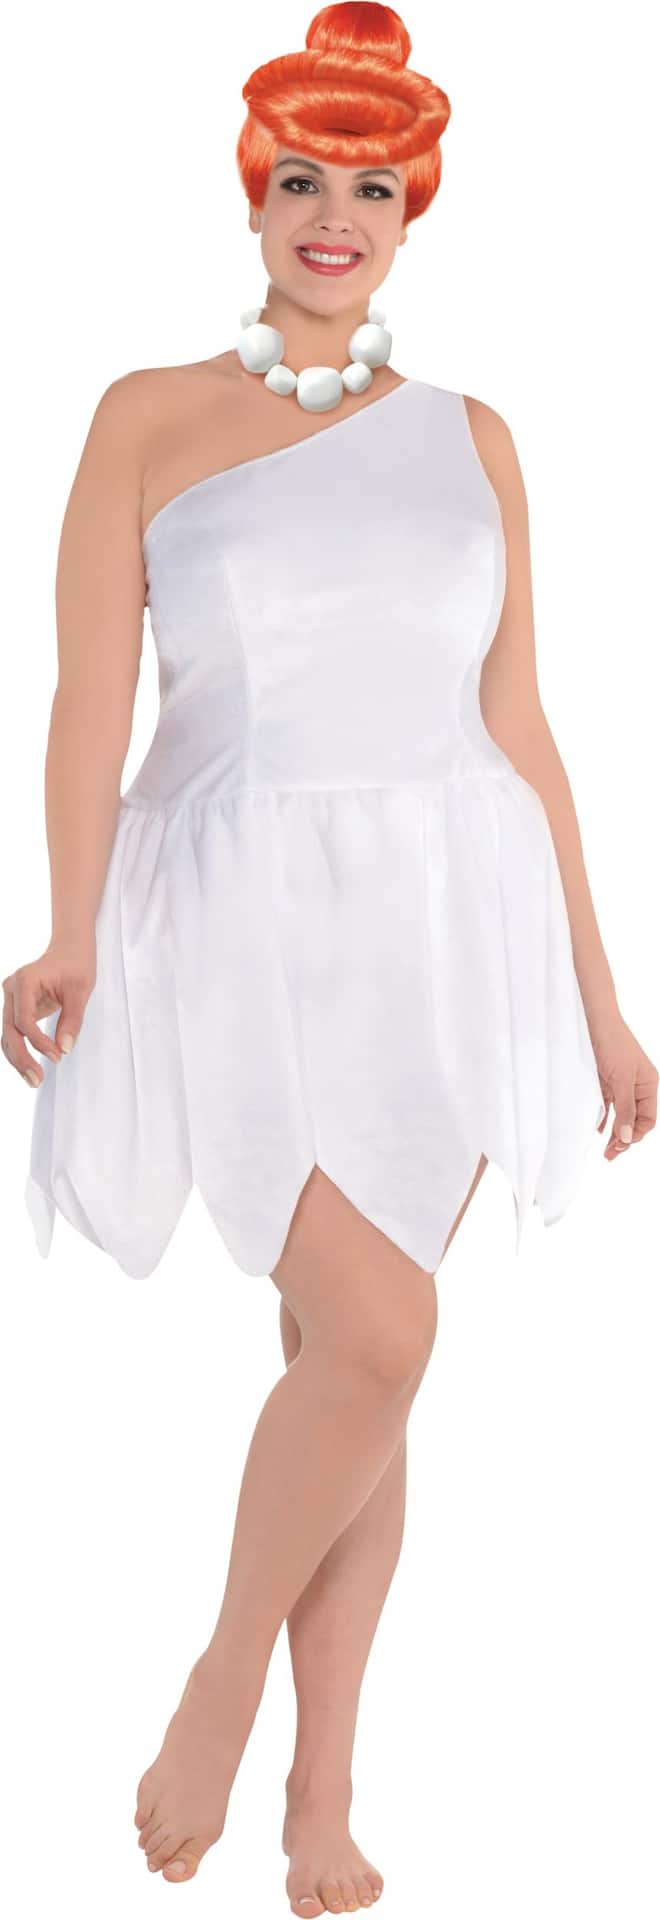 Womens The Flintstones Wilma White Dress With Necklace And Wig Halloween Costume Plus Size 